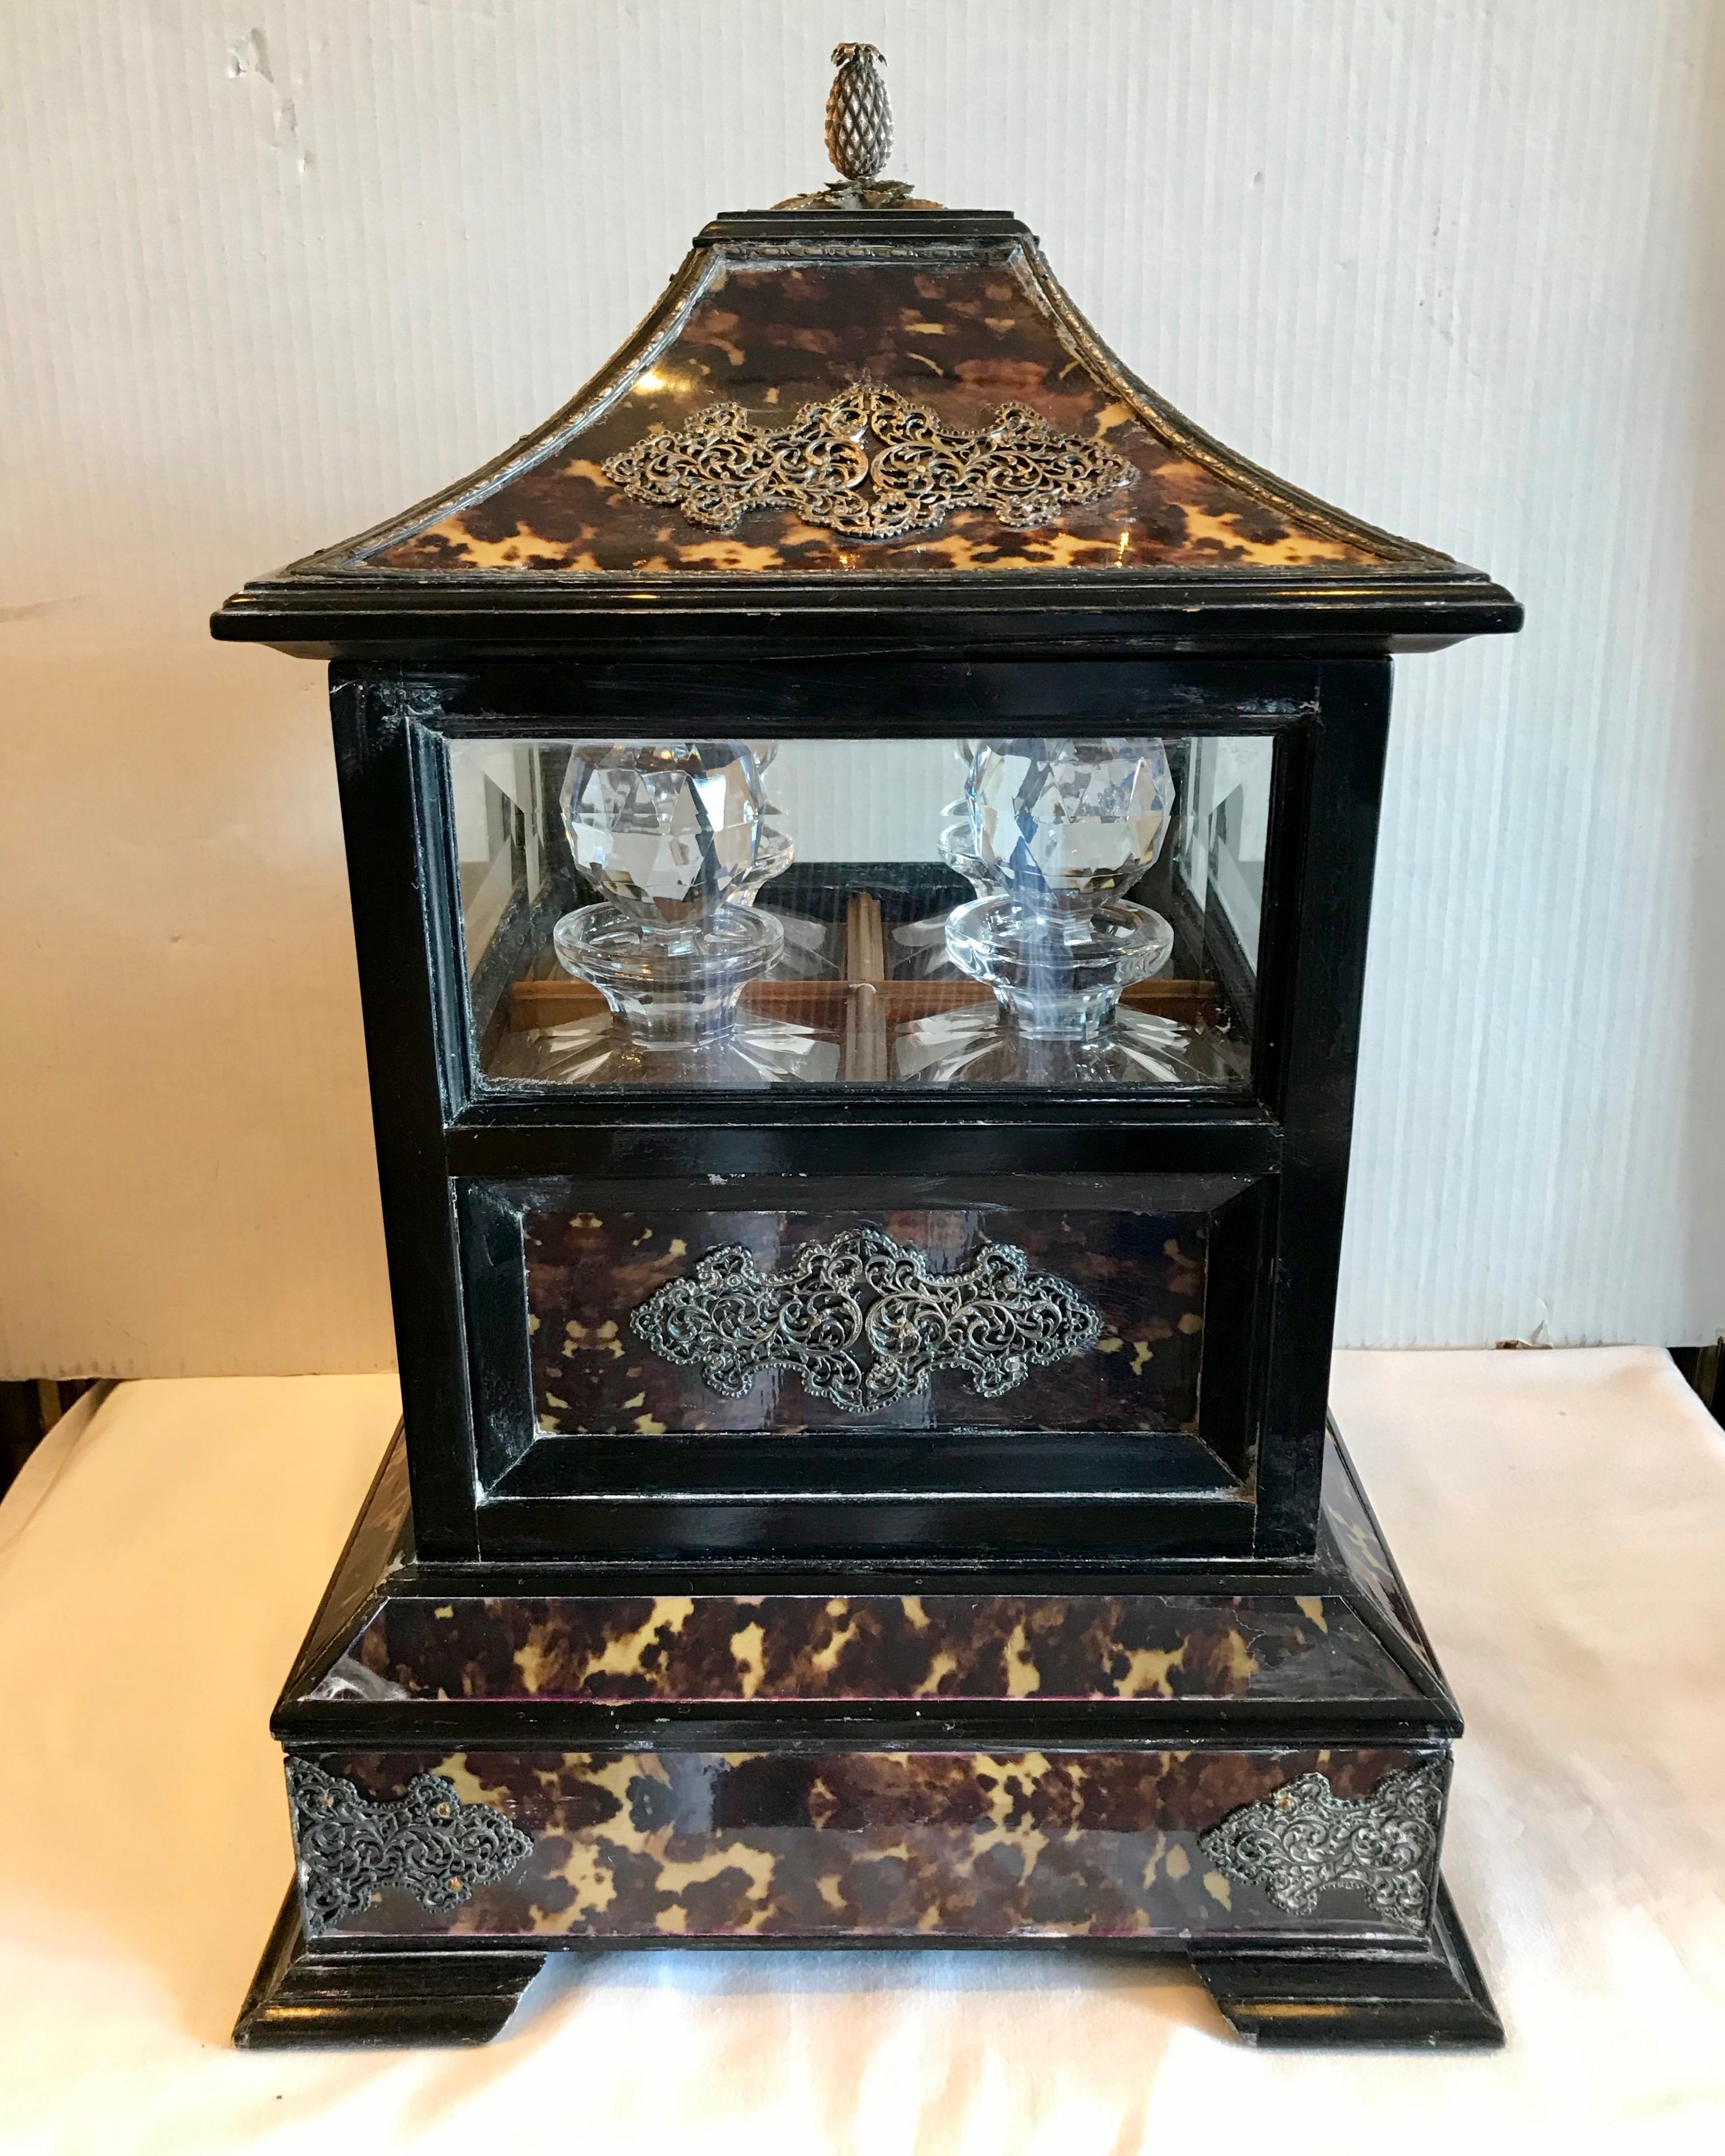 Dramatic in scale and proportion and fitted with 4 fine decanters in the style of Maitland Smith. The cellarette is further decorated with silvered filigree 
applied accents.
Stellar quality